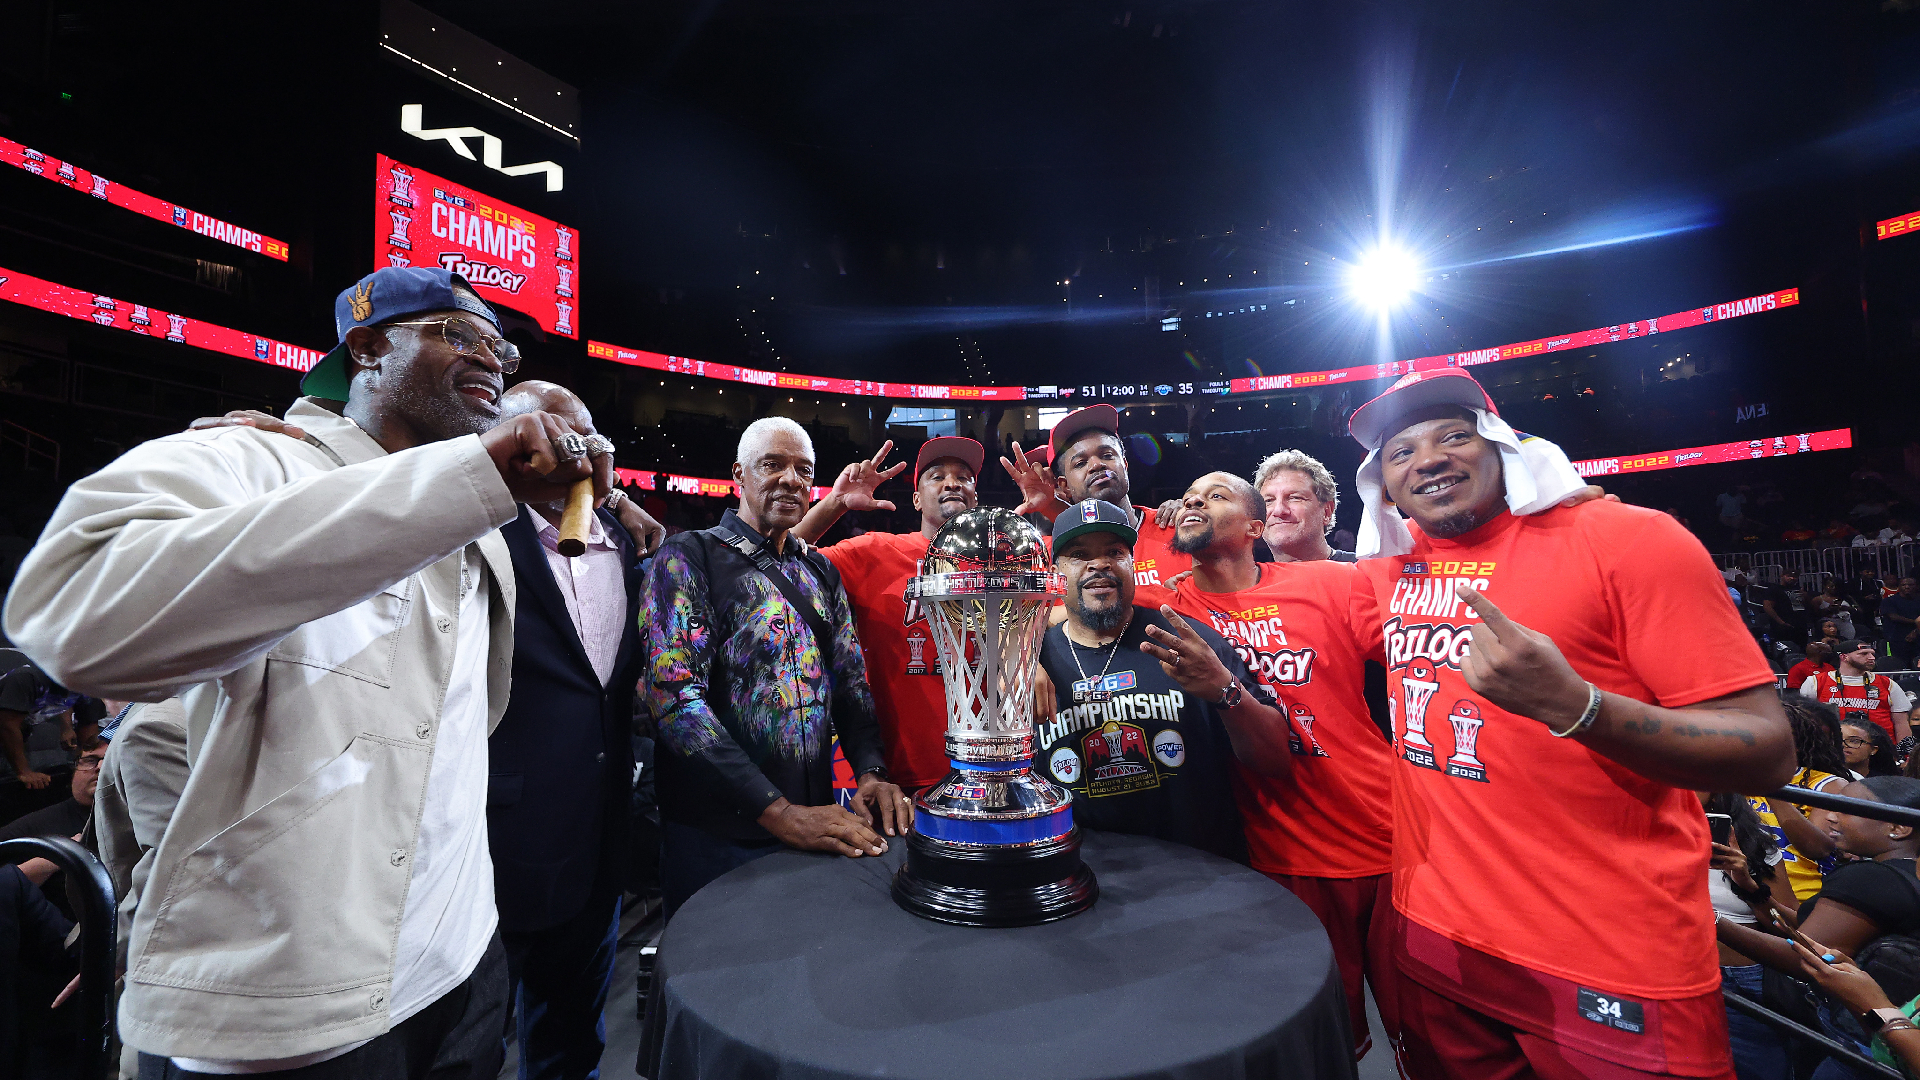 2022 BIG3 CHAMPIONSHIP GAME HIGHEST RATED EVENT SINCE 2019